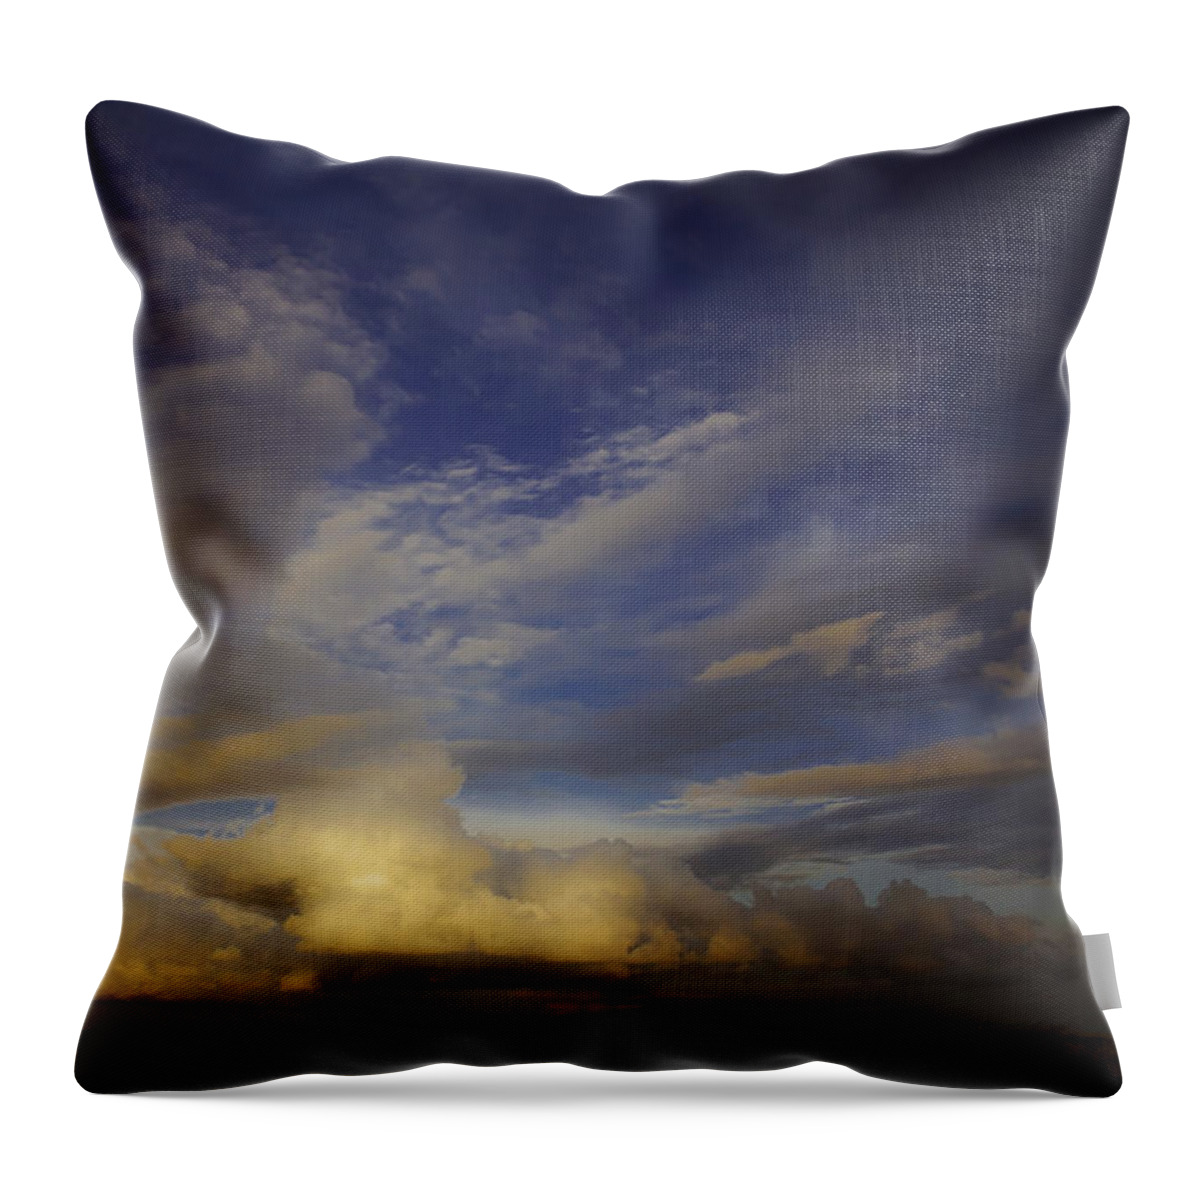 Landscape Throw Pillow featuring the photograph Stormy Sunset by Toni Hopper